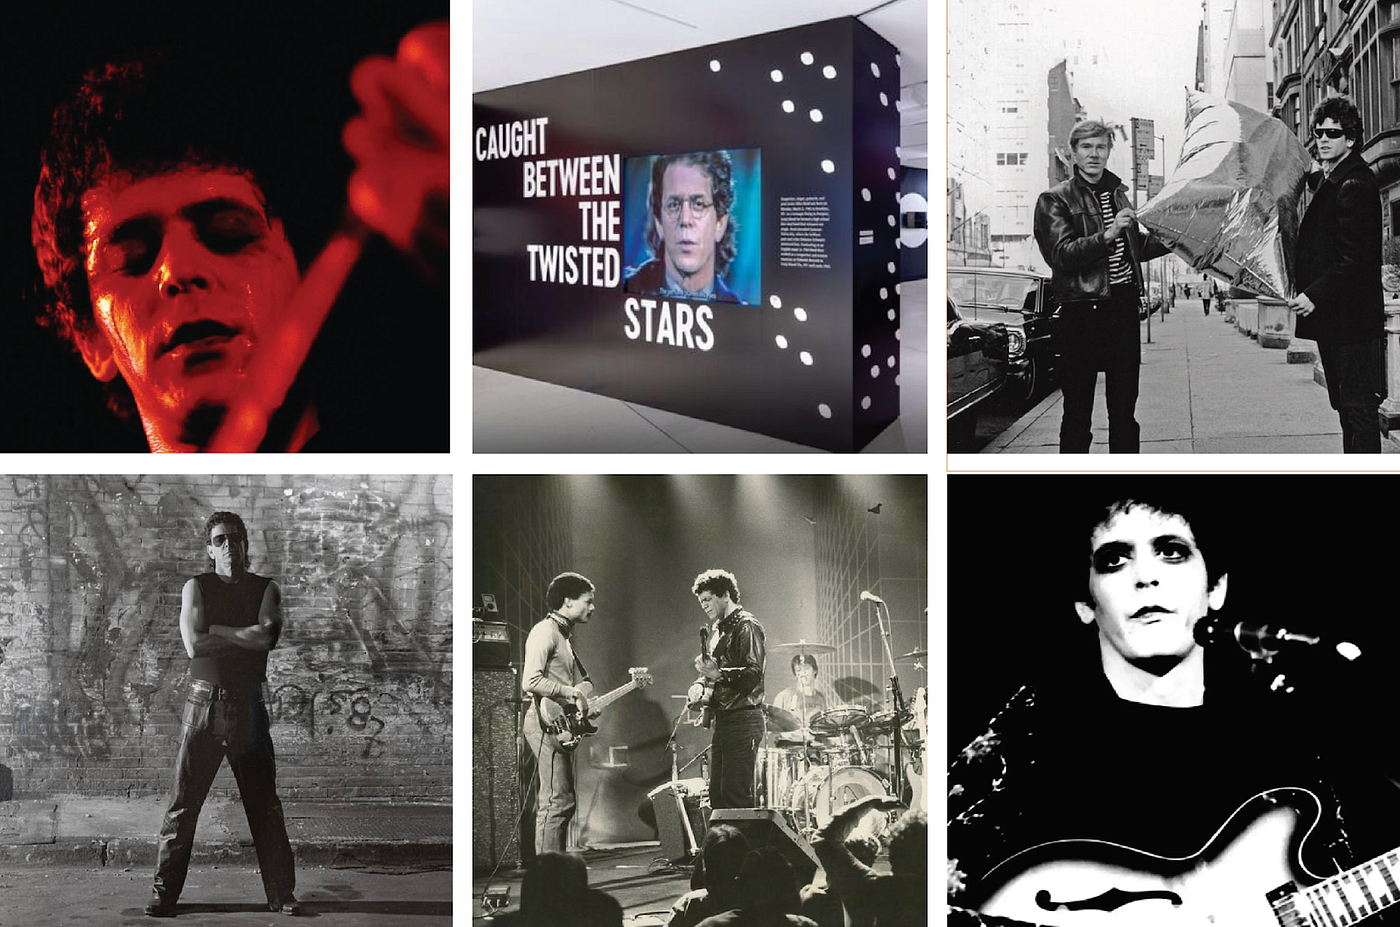 Lou Reed's R&R Odyssey. A dazzling exhibition traces the long